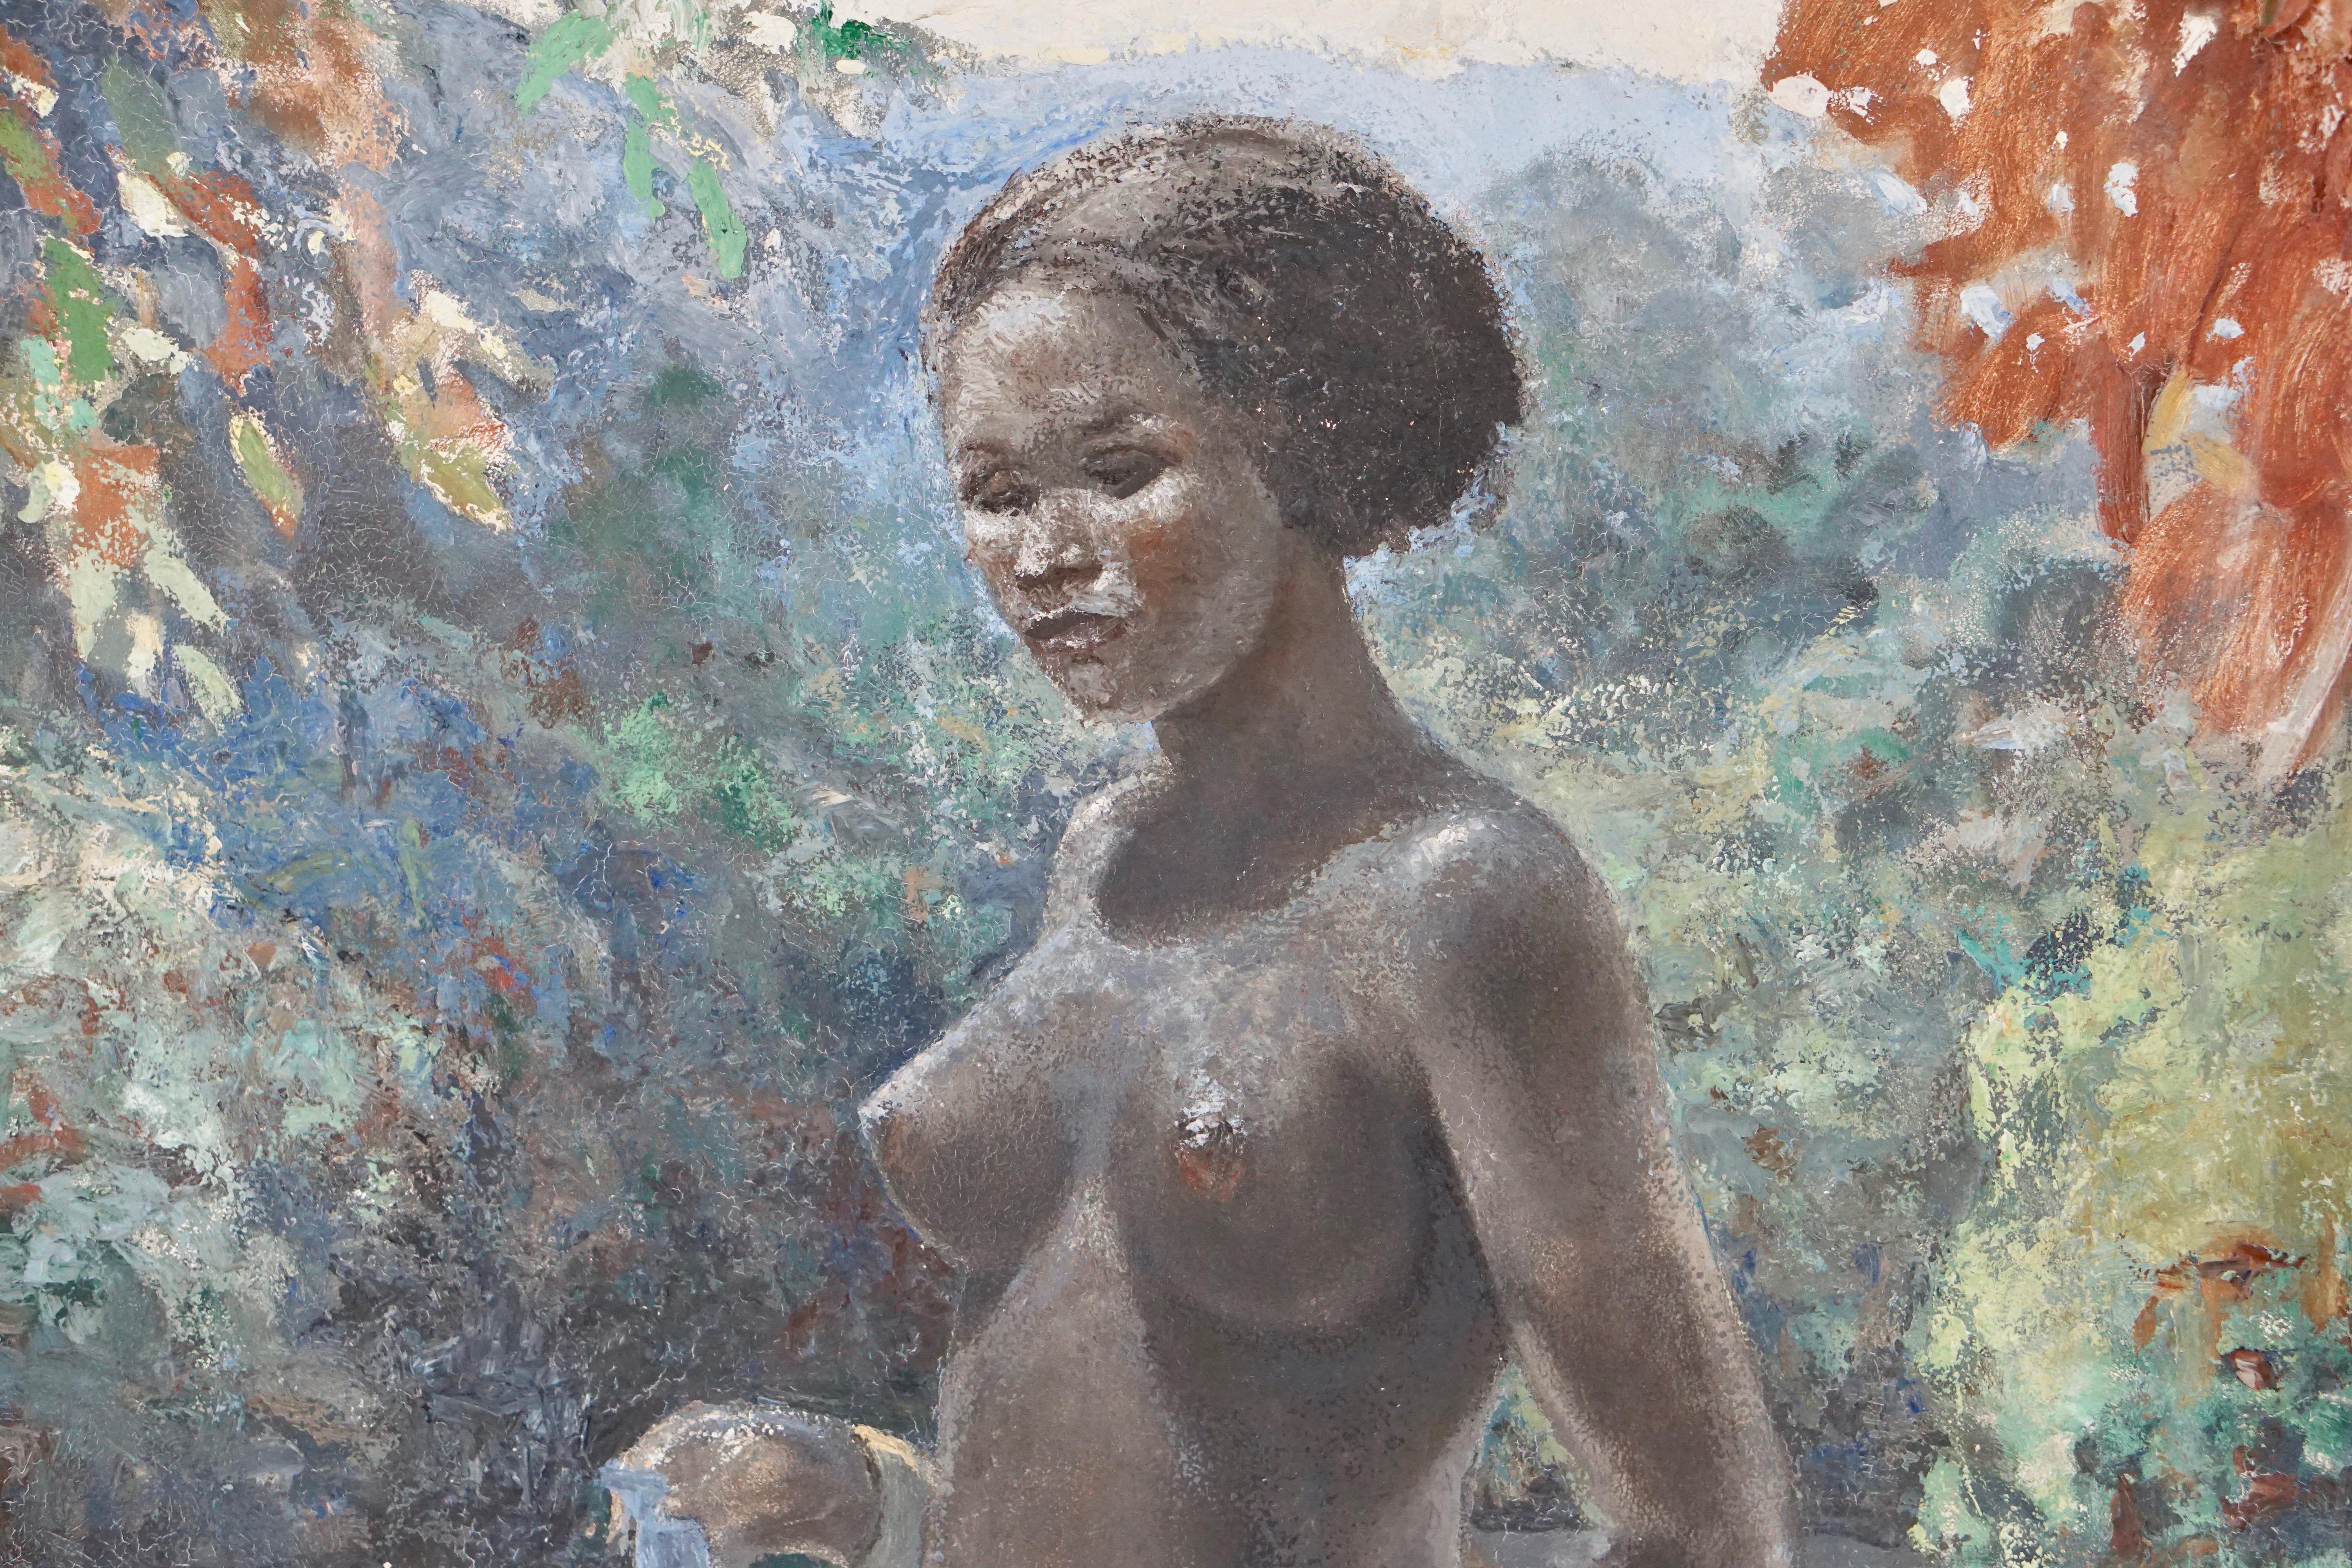 Painting by a nude African woman in Congo made by the Dutch painter Rob Francken.
49 x 69 cm unframed, 61 x 81 x 4 inches in white painted wood frame.